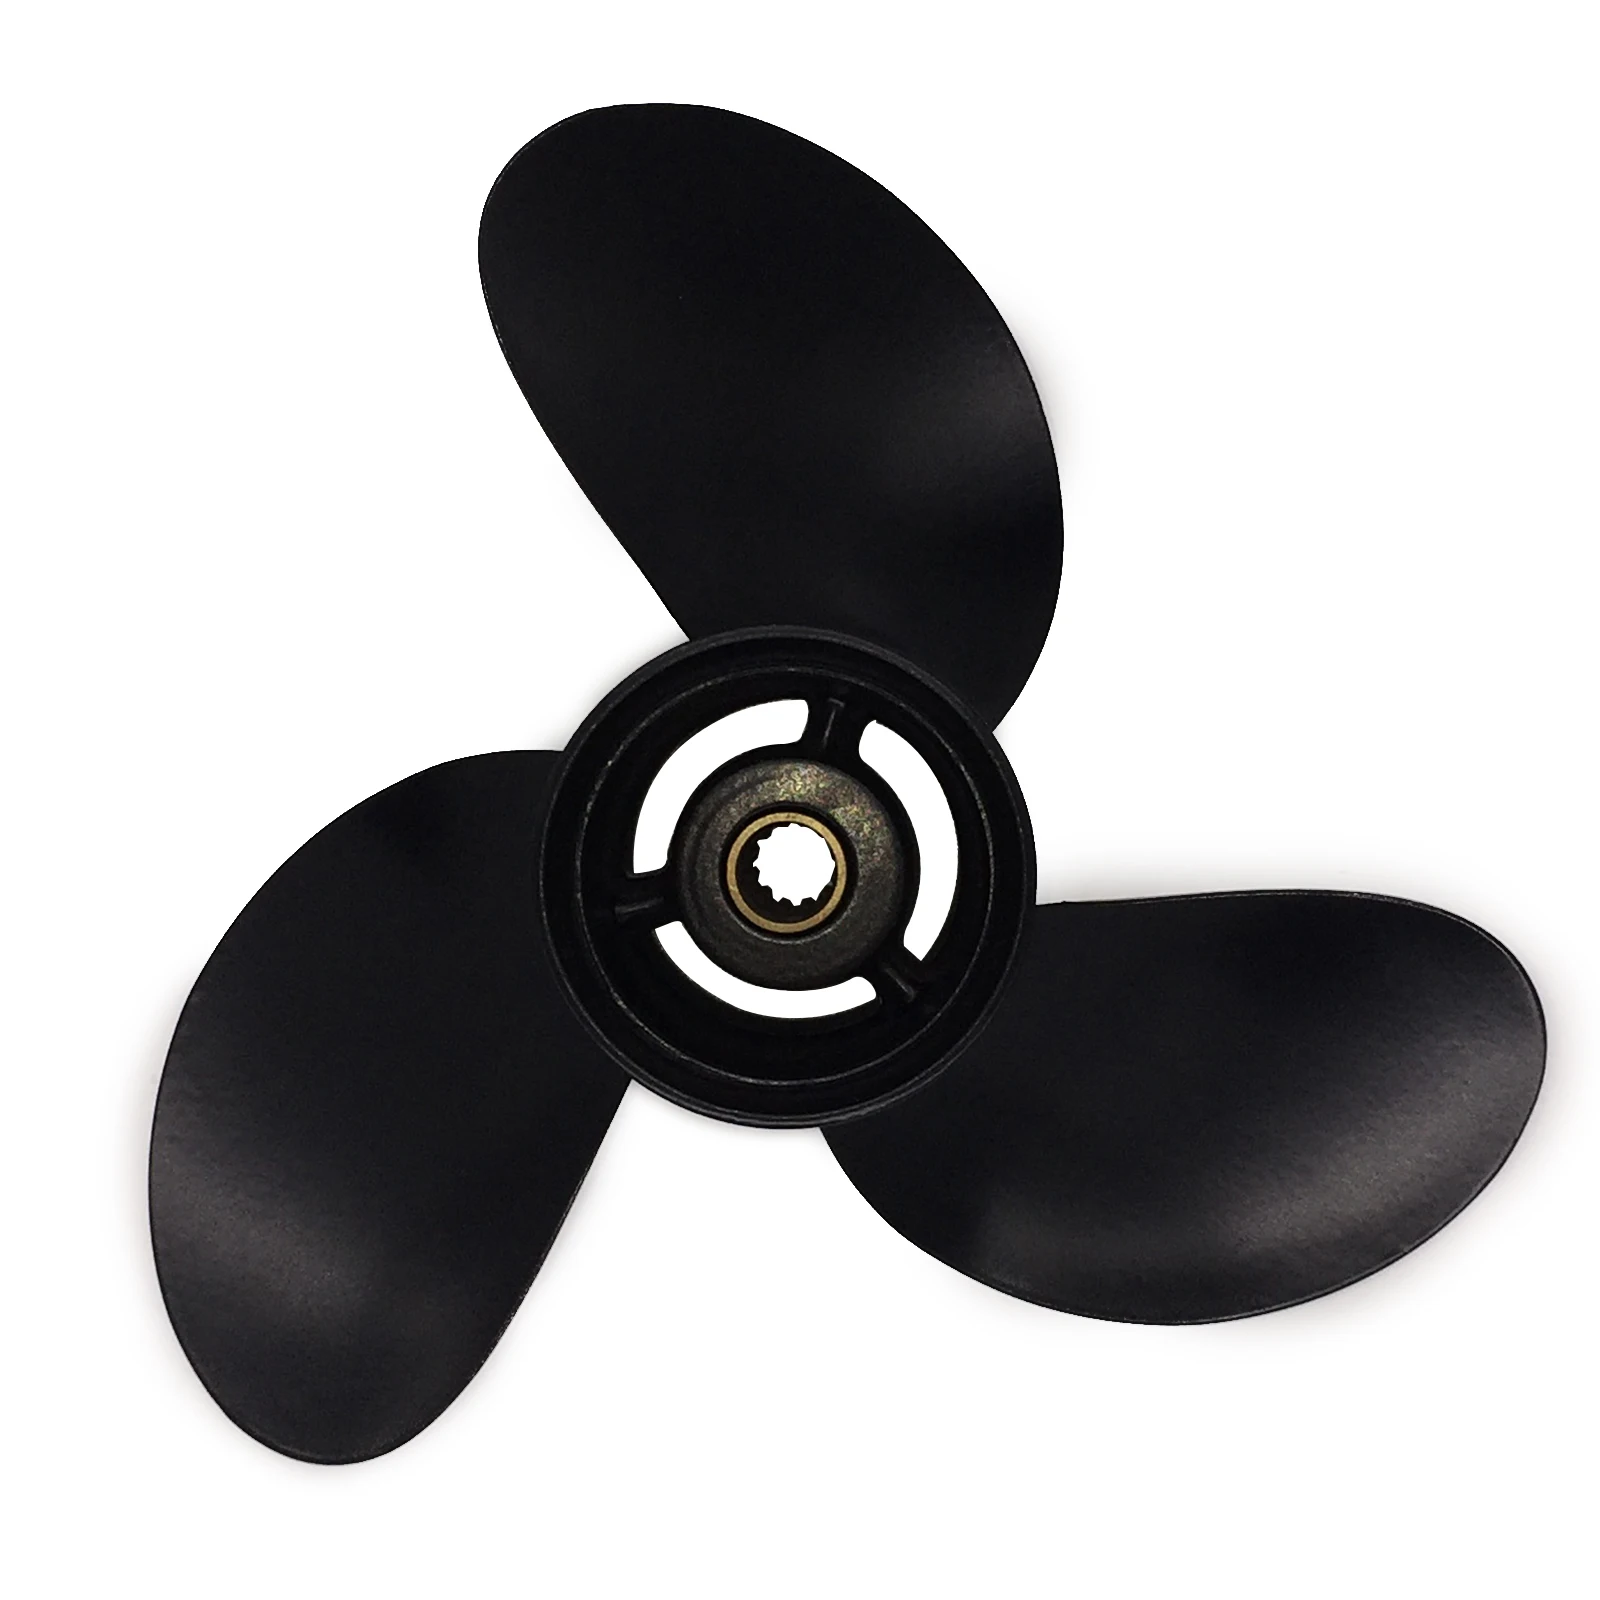 Boat Propeller 9.5x8 Fit for Tohatsu Outboard 9.8HP-18HP 3 Blades Aluminum Prop 14 Tooth Propel RH OEM NO: 3BAB64516-1 9.5x8 boat propeller 7 1 2x7 fit for suzuki outboard dt5 6 3 blades aluminum prop 10 tooth propel rh oem no 58111 98651 019 7 5x7